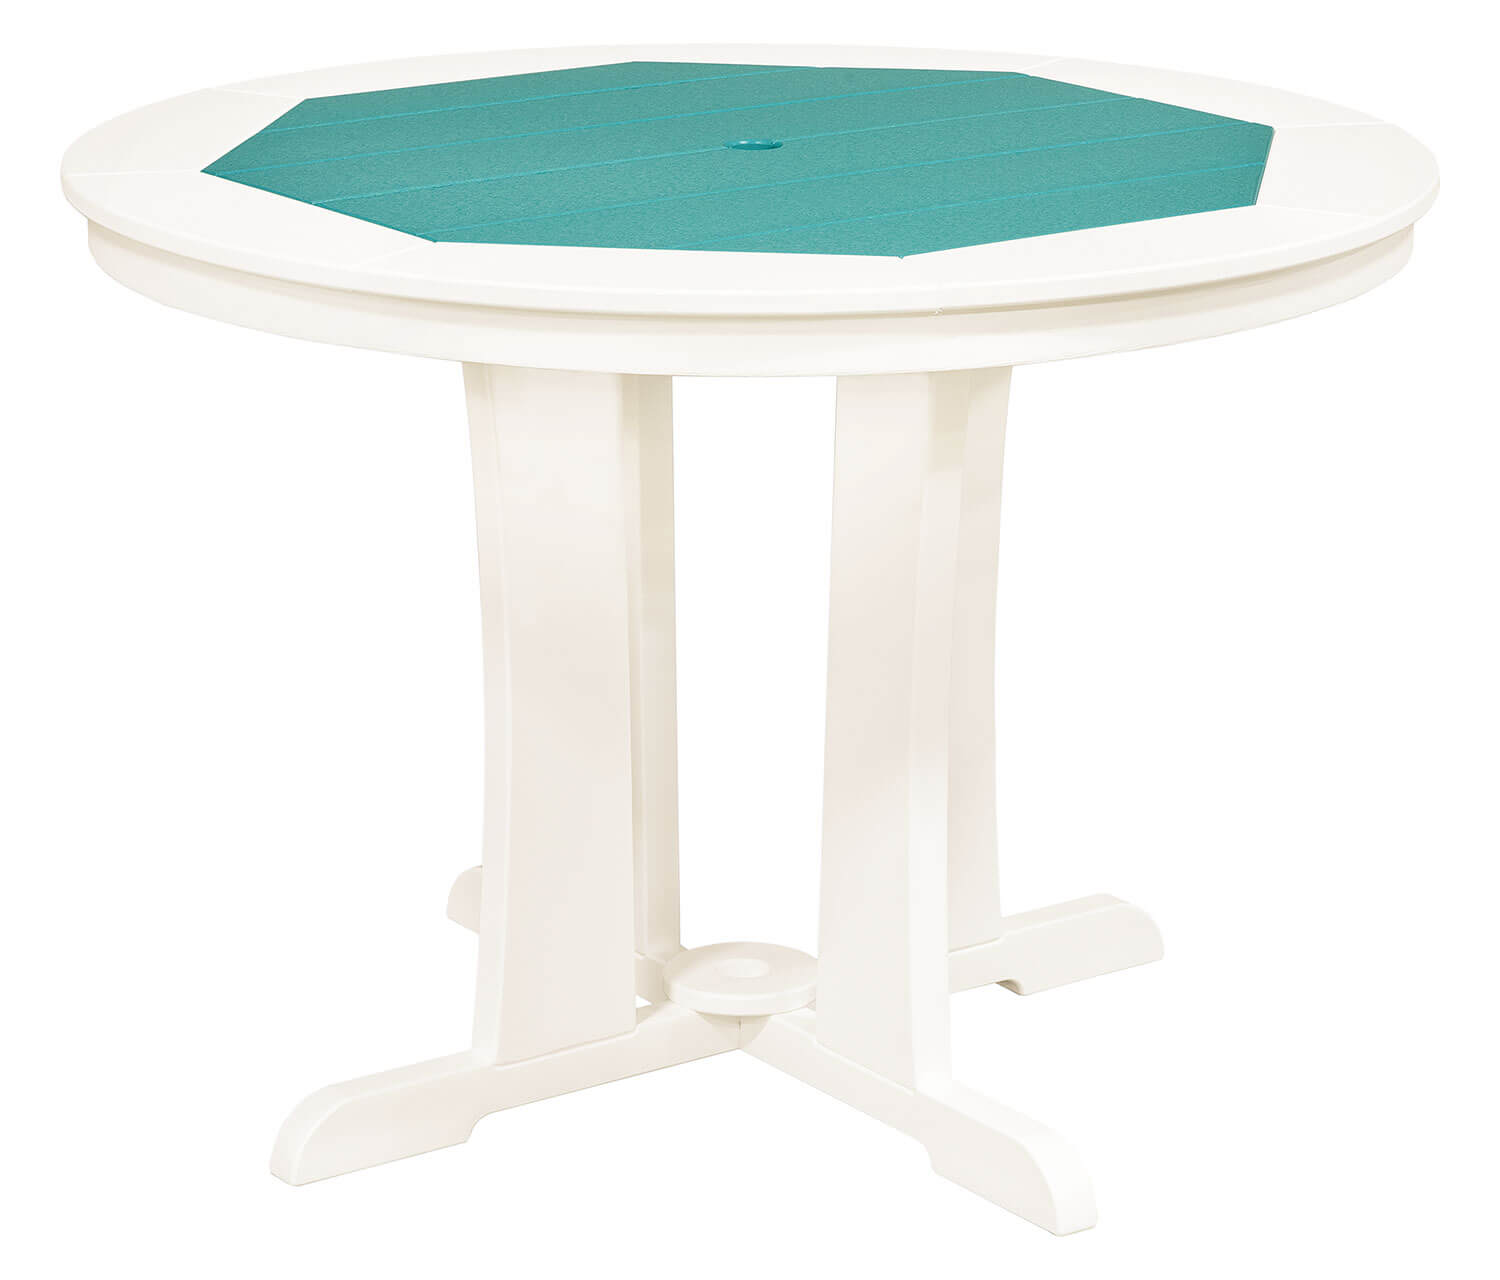 EC Woods Port Royal Outdoor Poly Dining Height Table Shown in Aruba Blue and Bright White